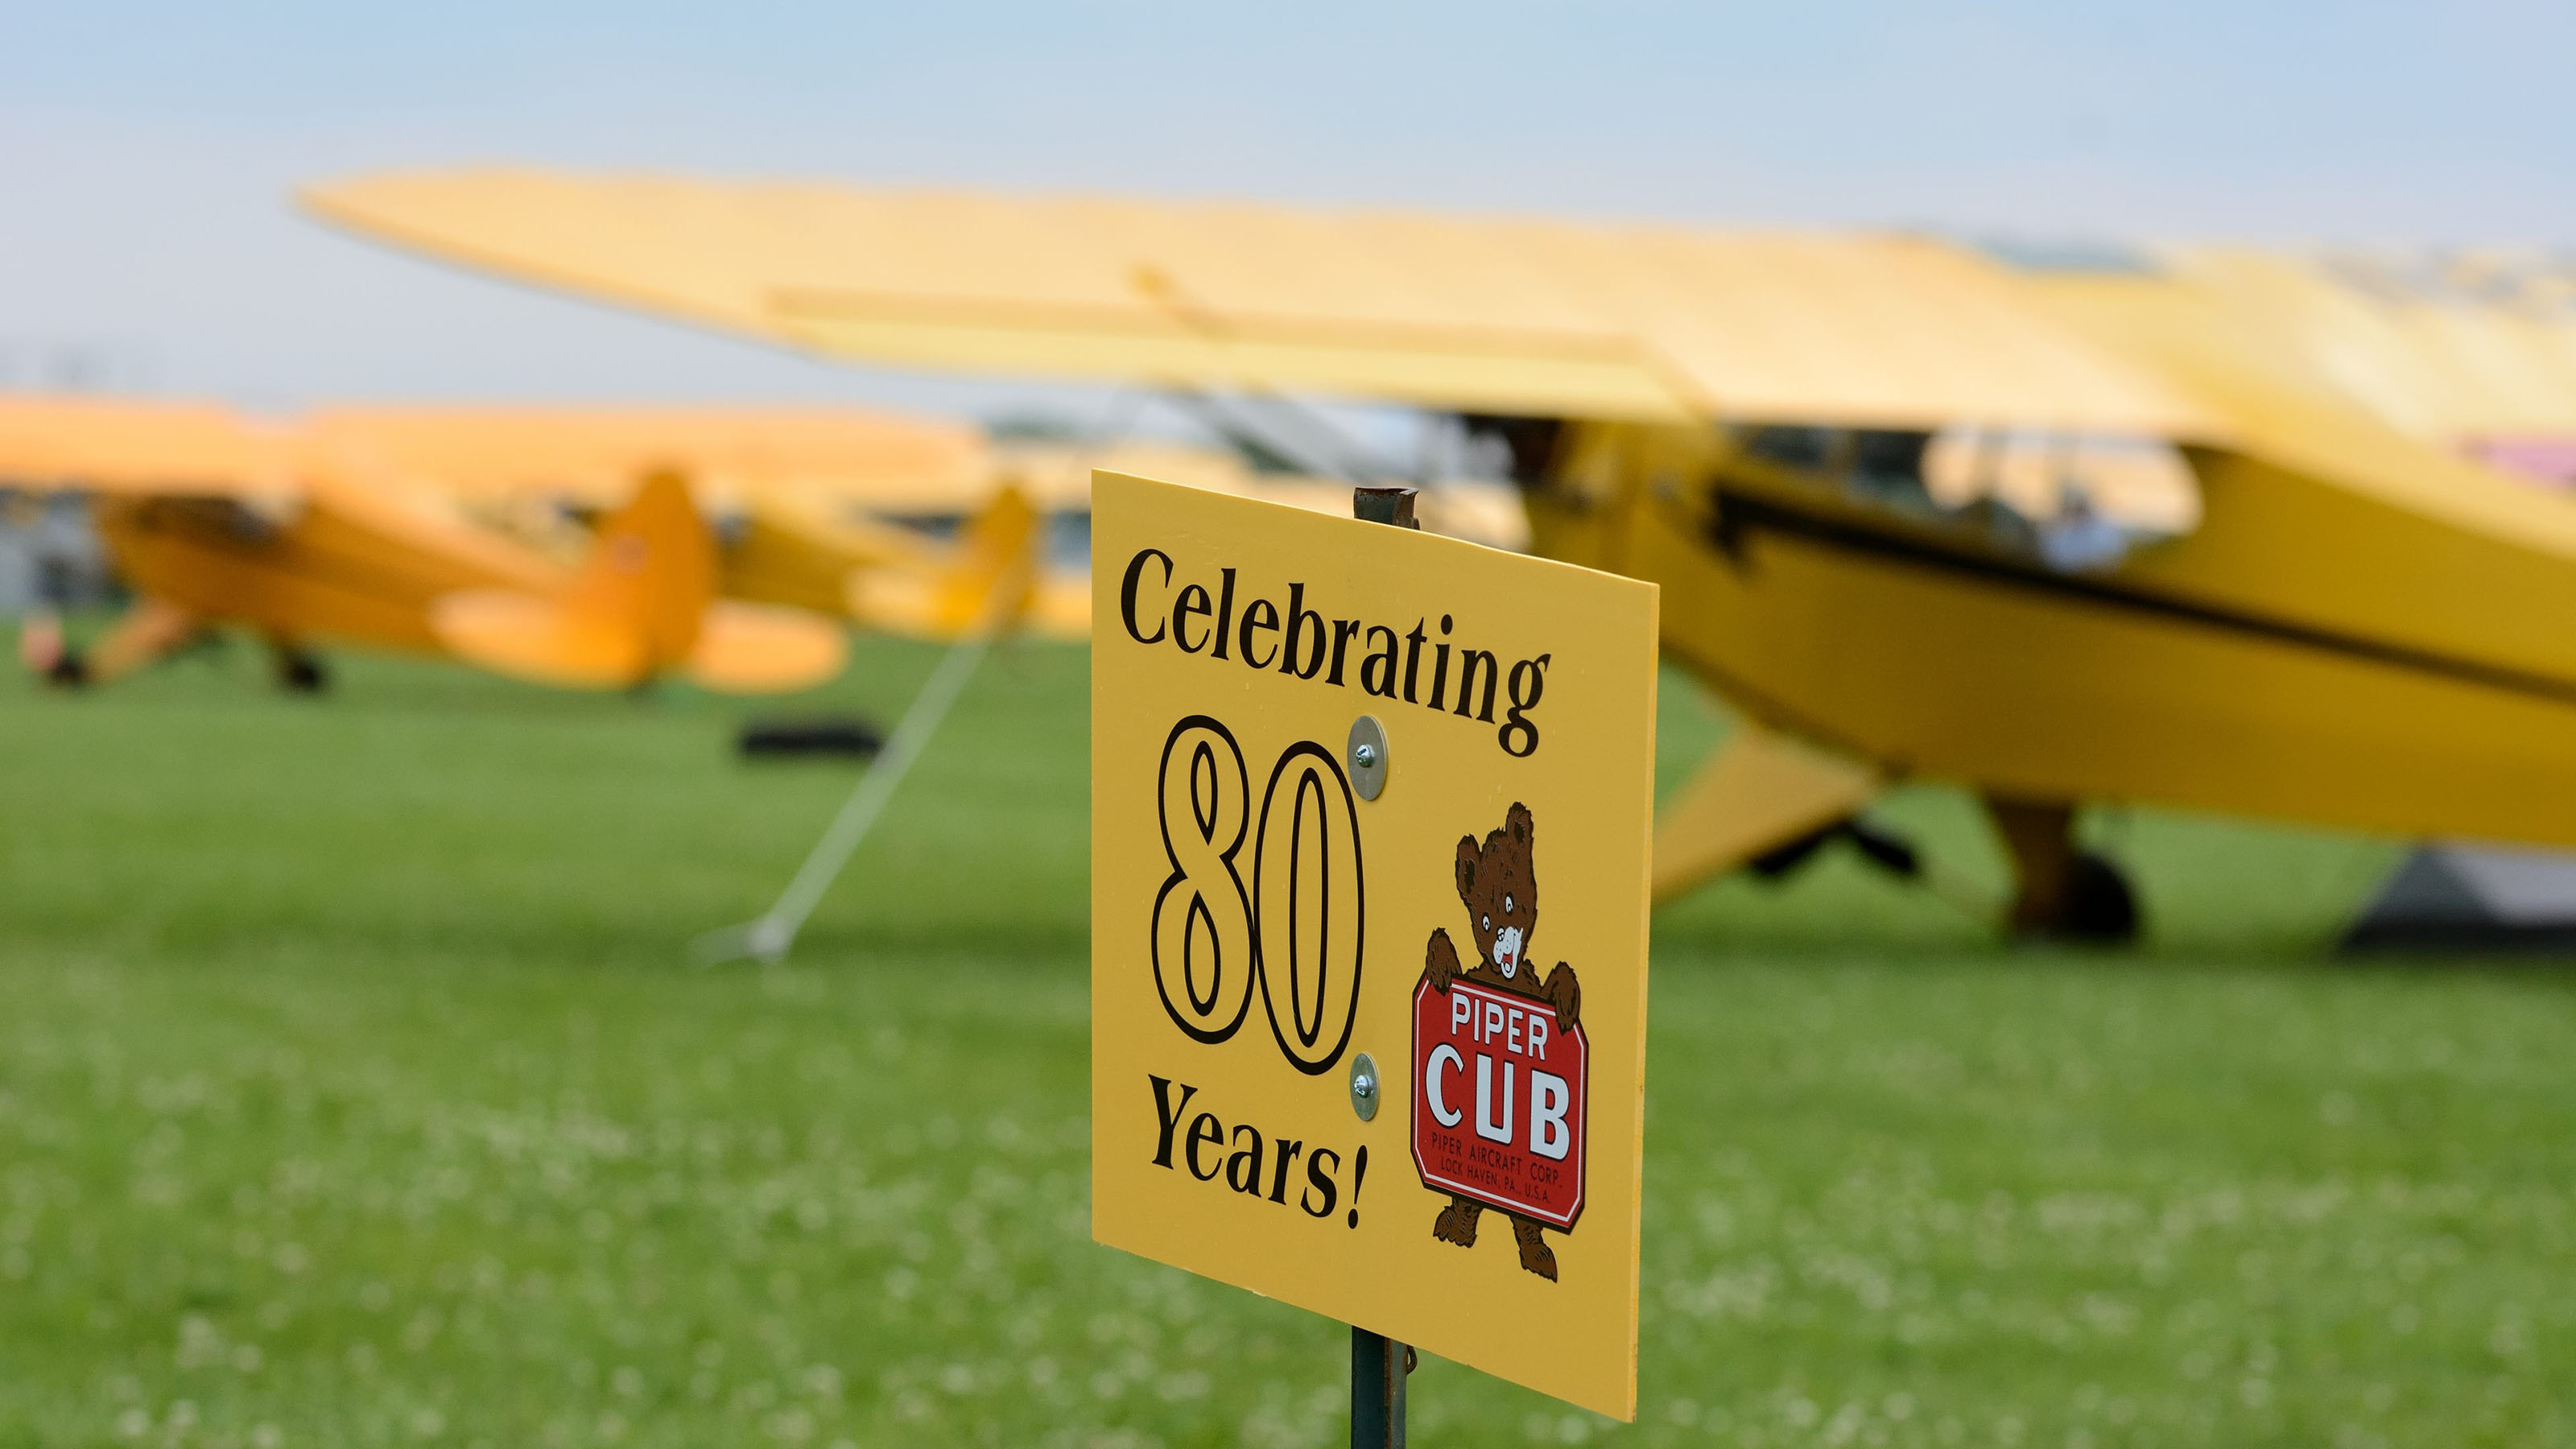 Special Cub-yellow signage greeted the Cubs 2 Oshkosh participants when they touched down early Sunday morning, July 23, at Wittman Regional Airport in Oshkosh.